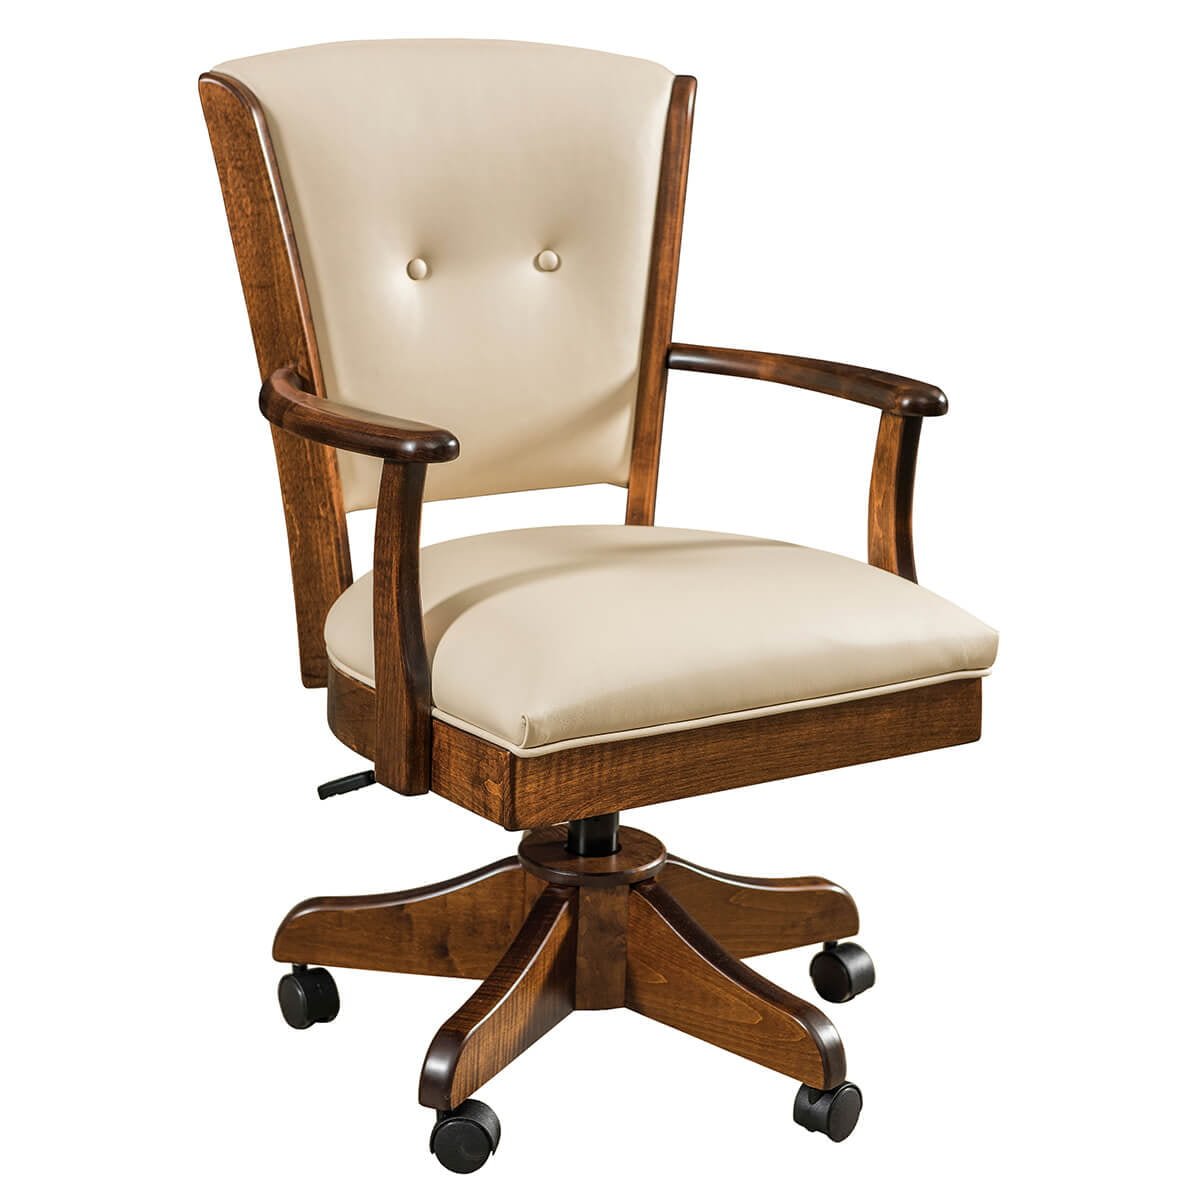 office furniture chairs